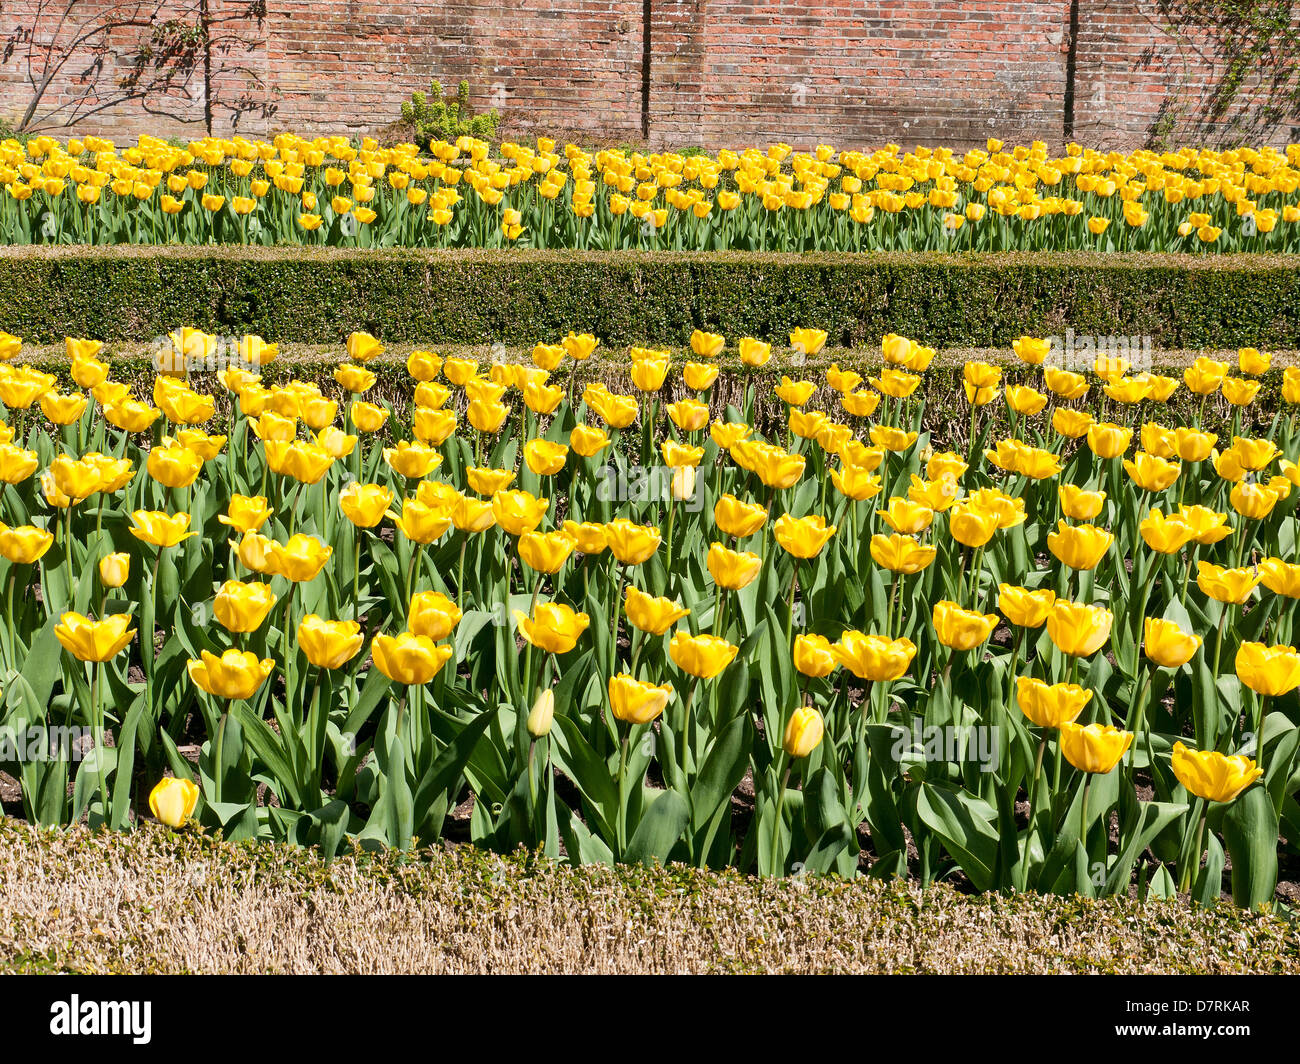 Tulips in the Long Garden, Cliveden House, National Trust Property, Bucks, UK Stock Photo